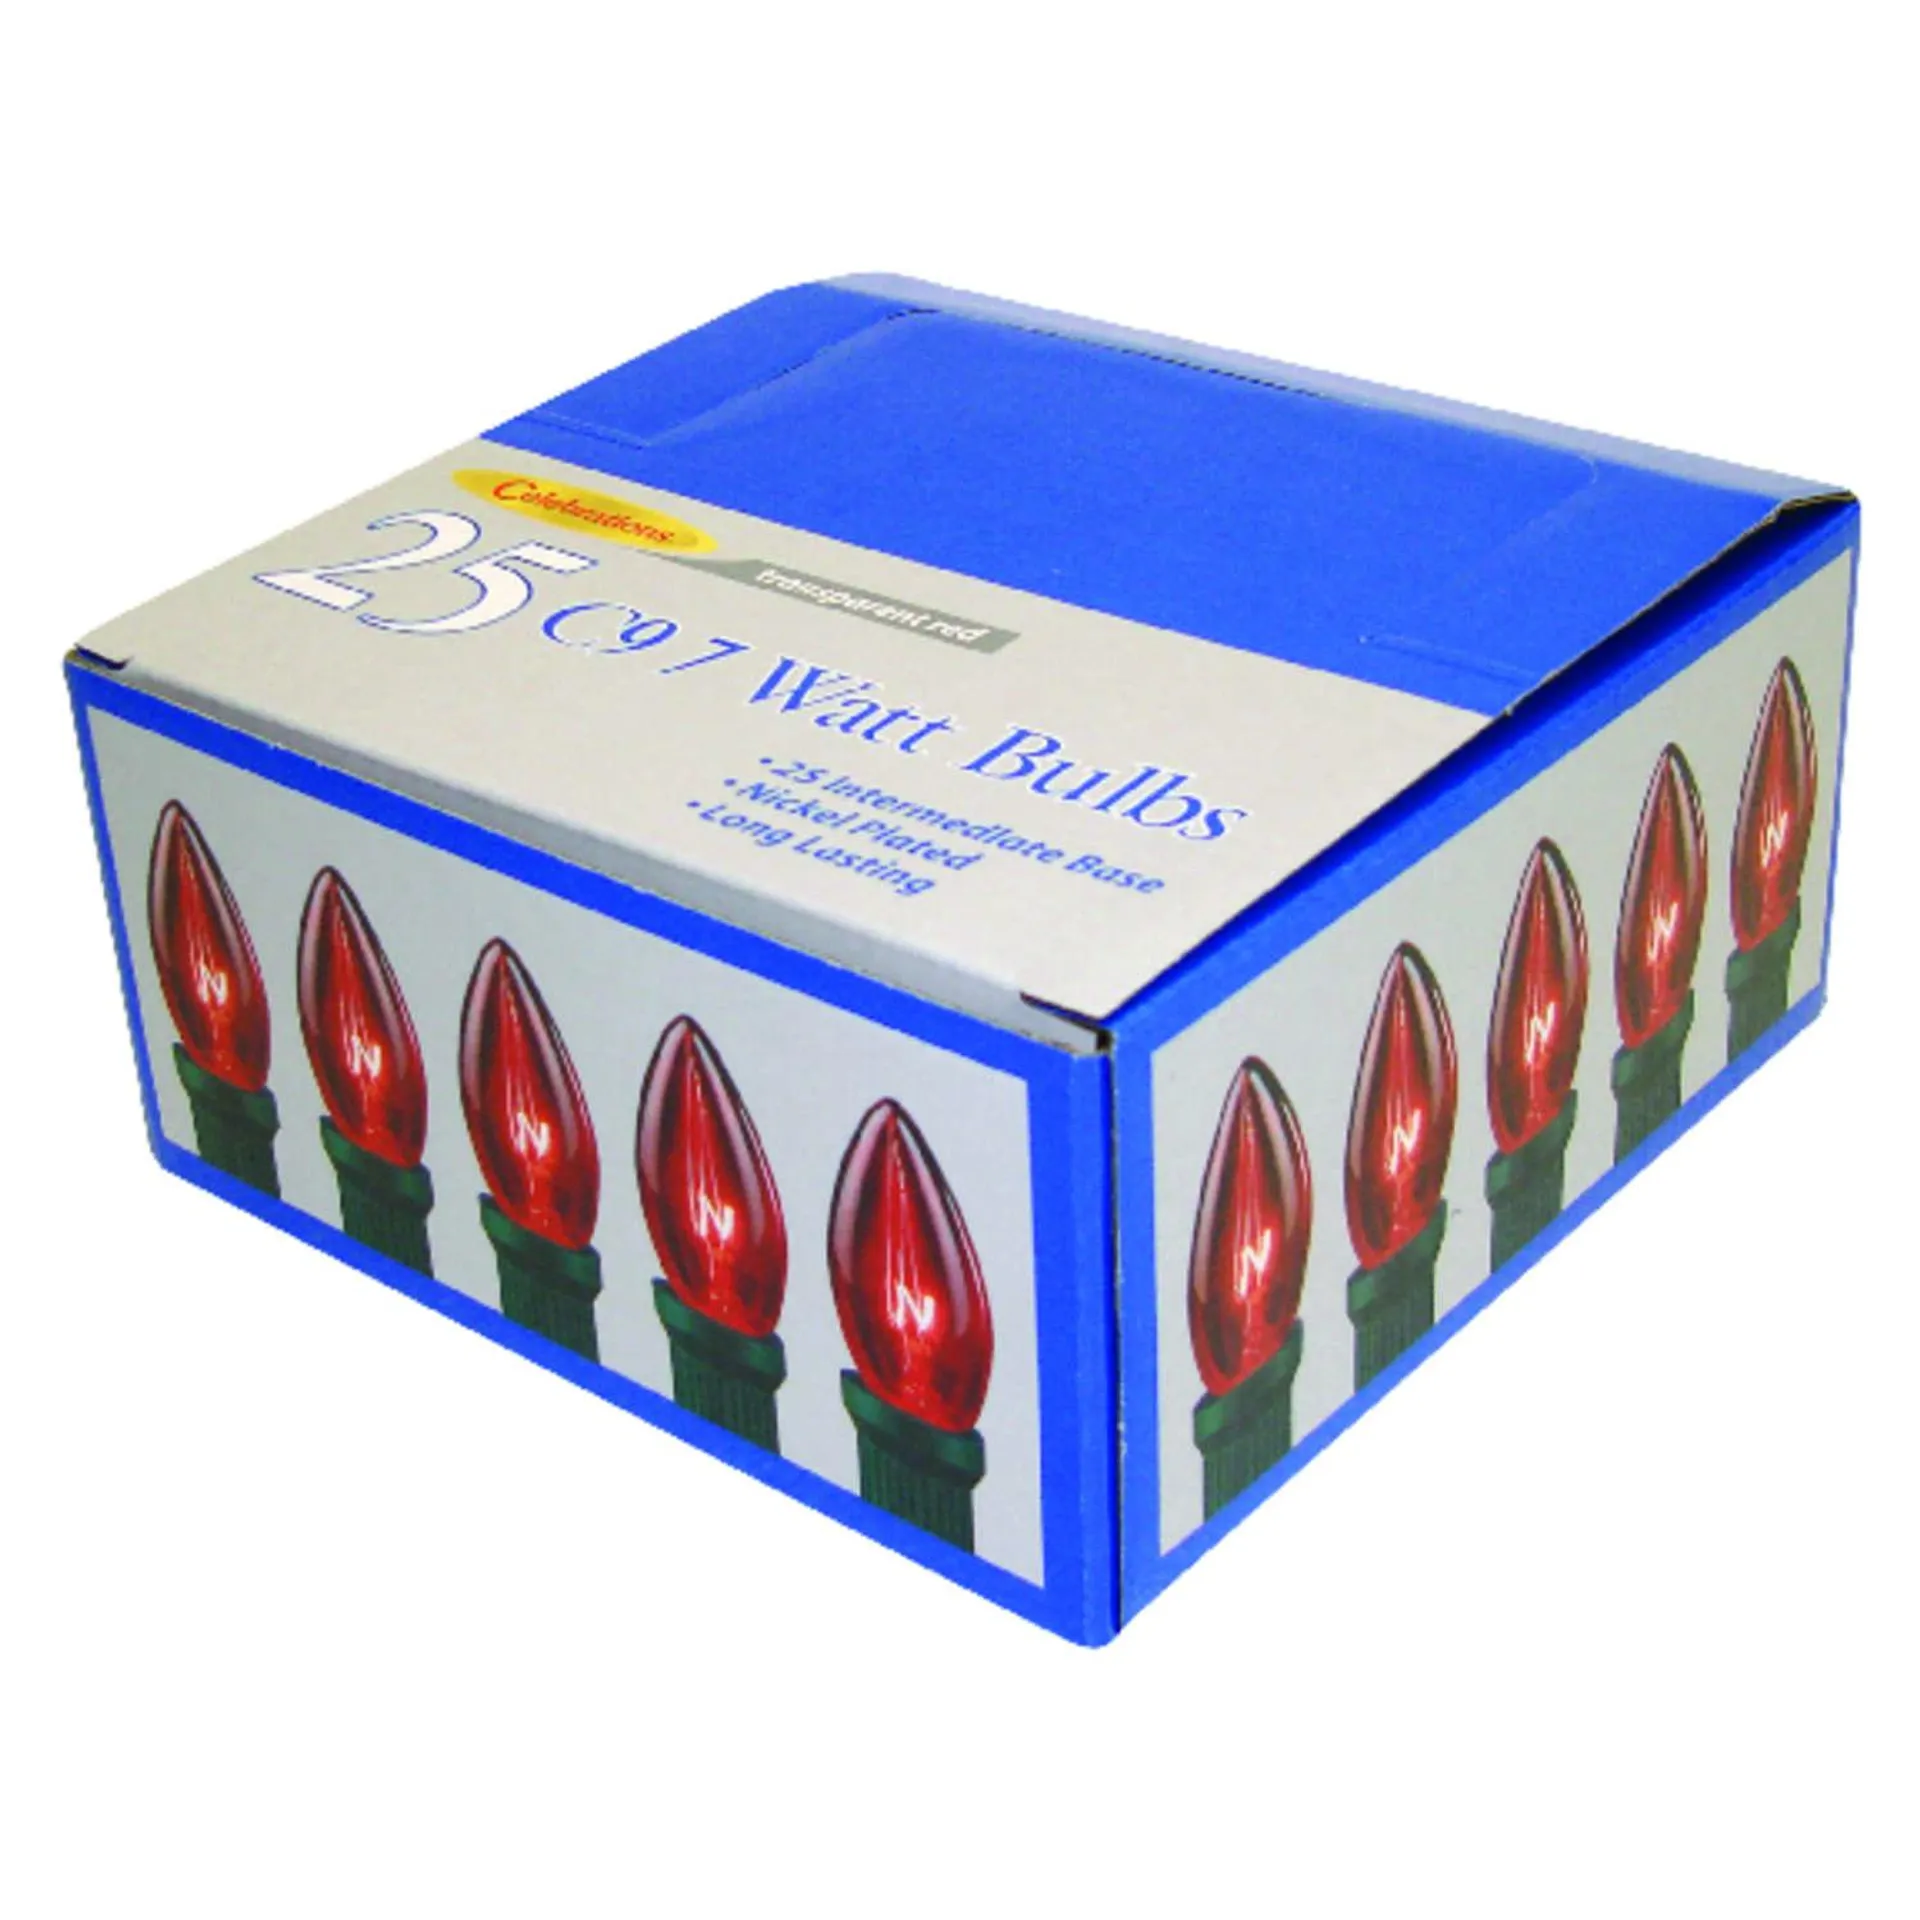 Celebrations Incandescent Red 25 ct Replacement Bulb